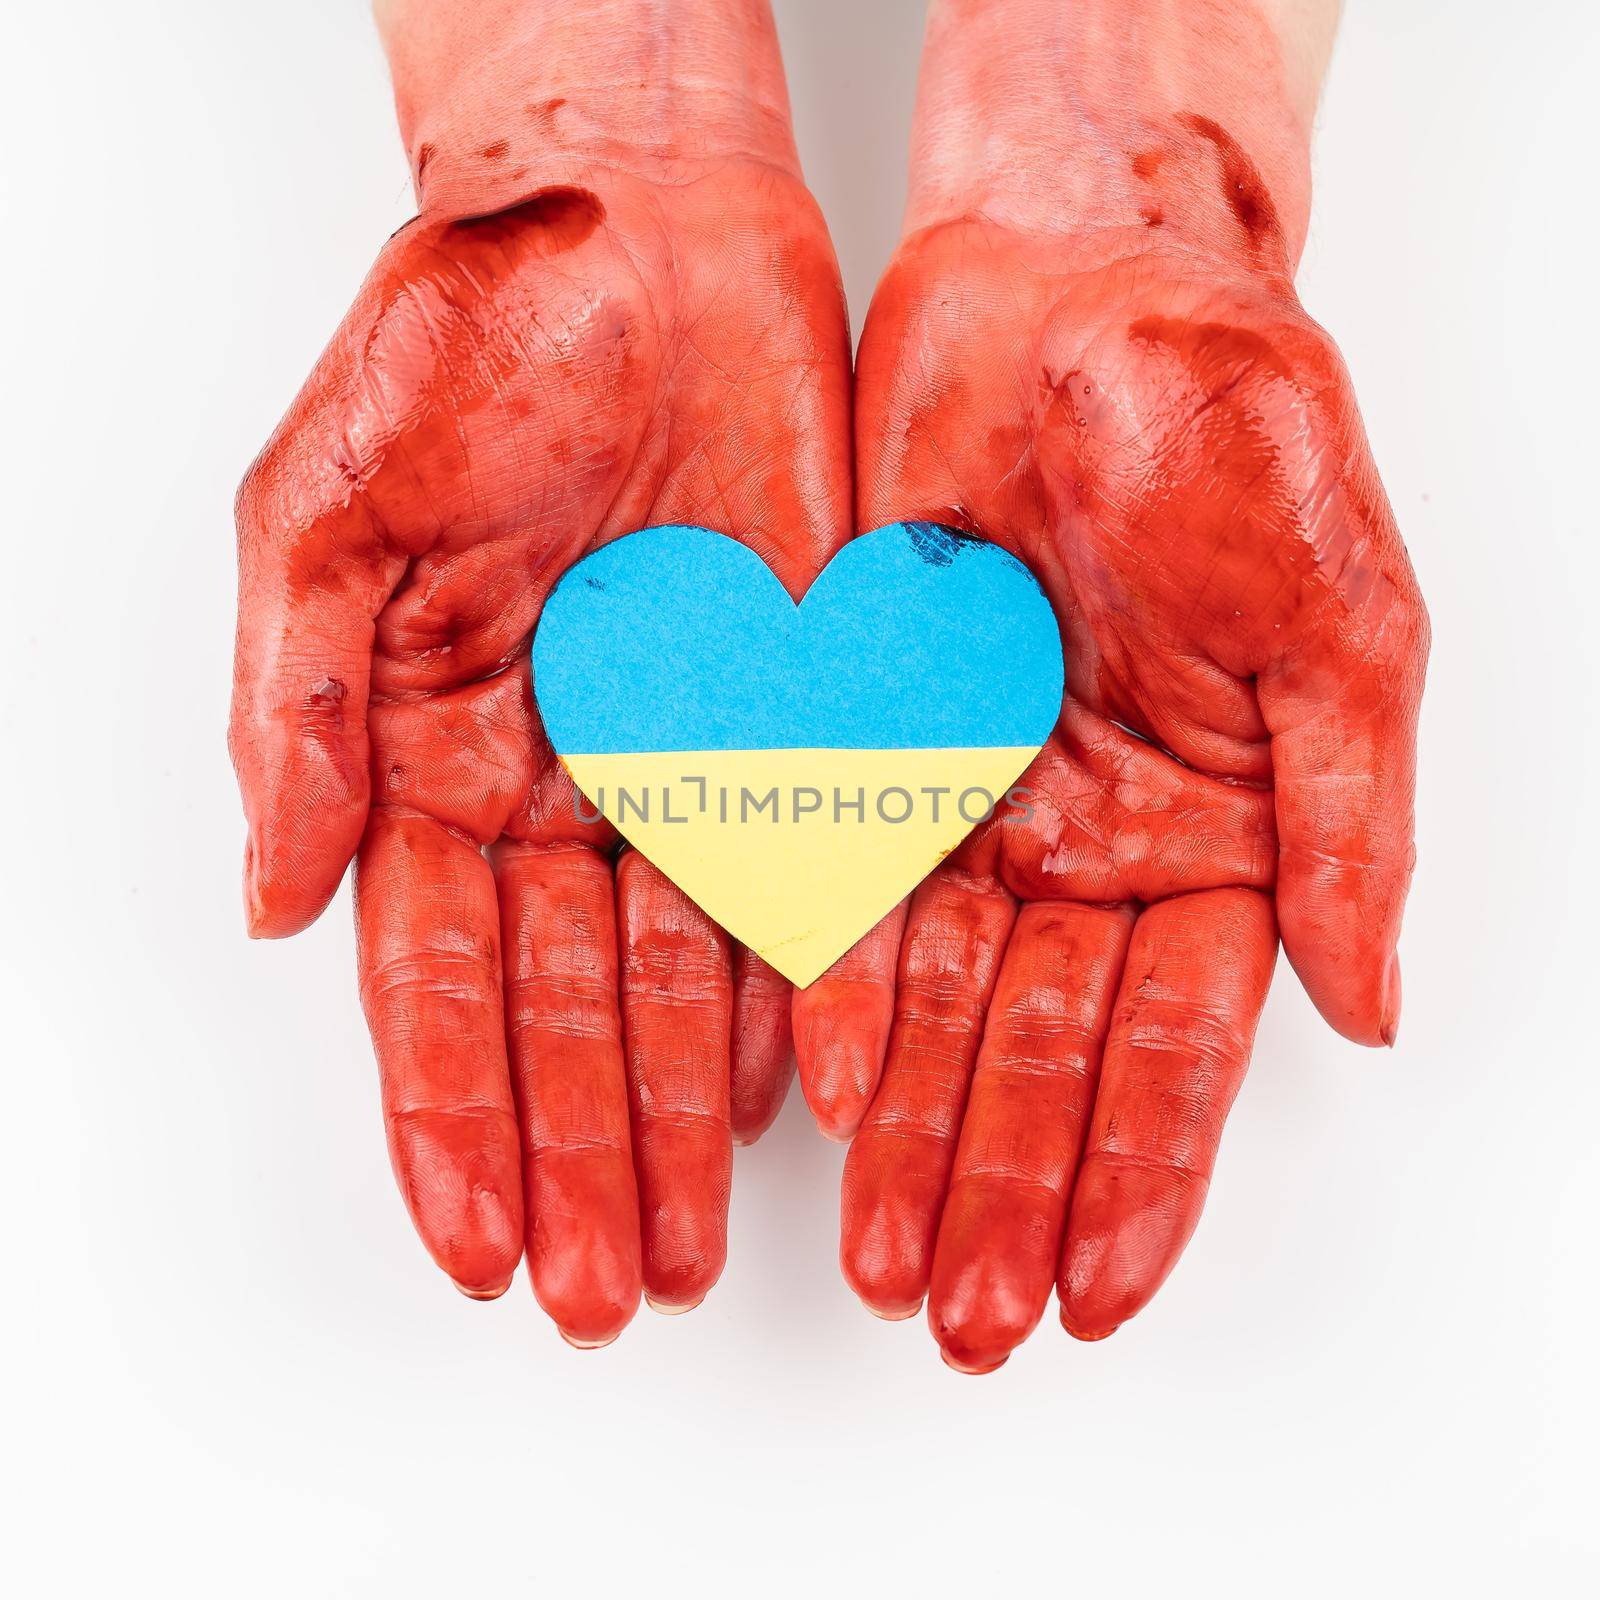 Woman with hands covered in blood holding a heart with the flag of ukraine on a white background. by mrwed54